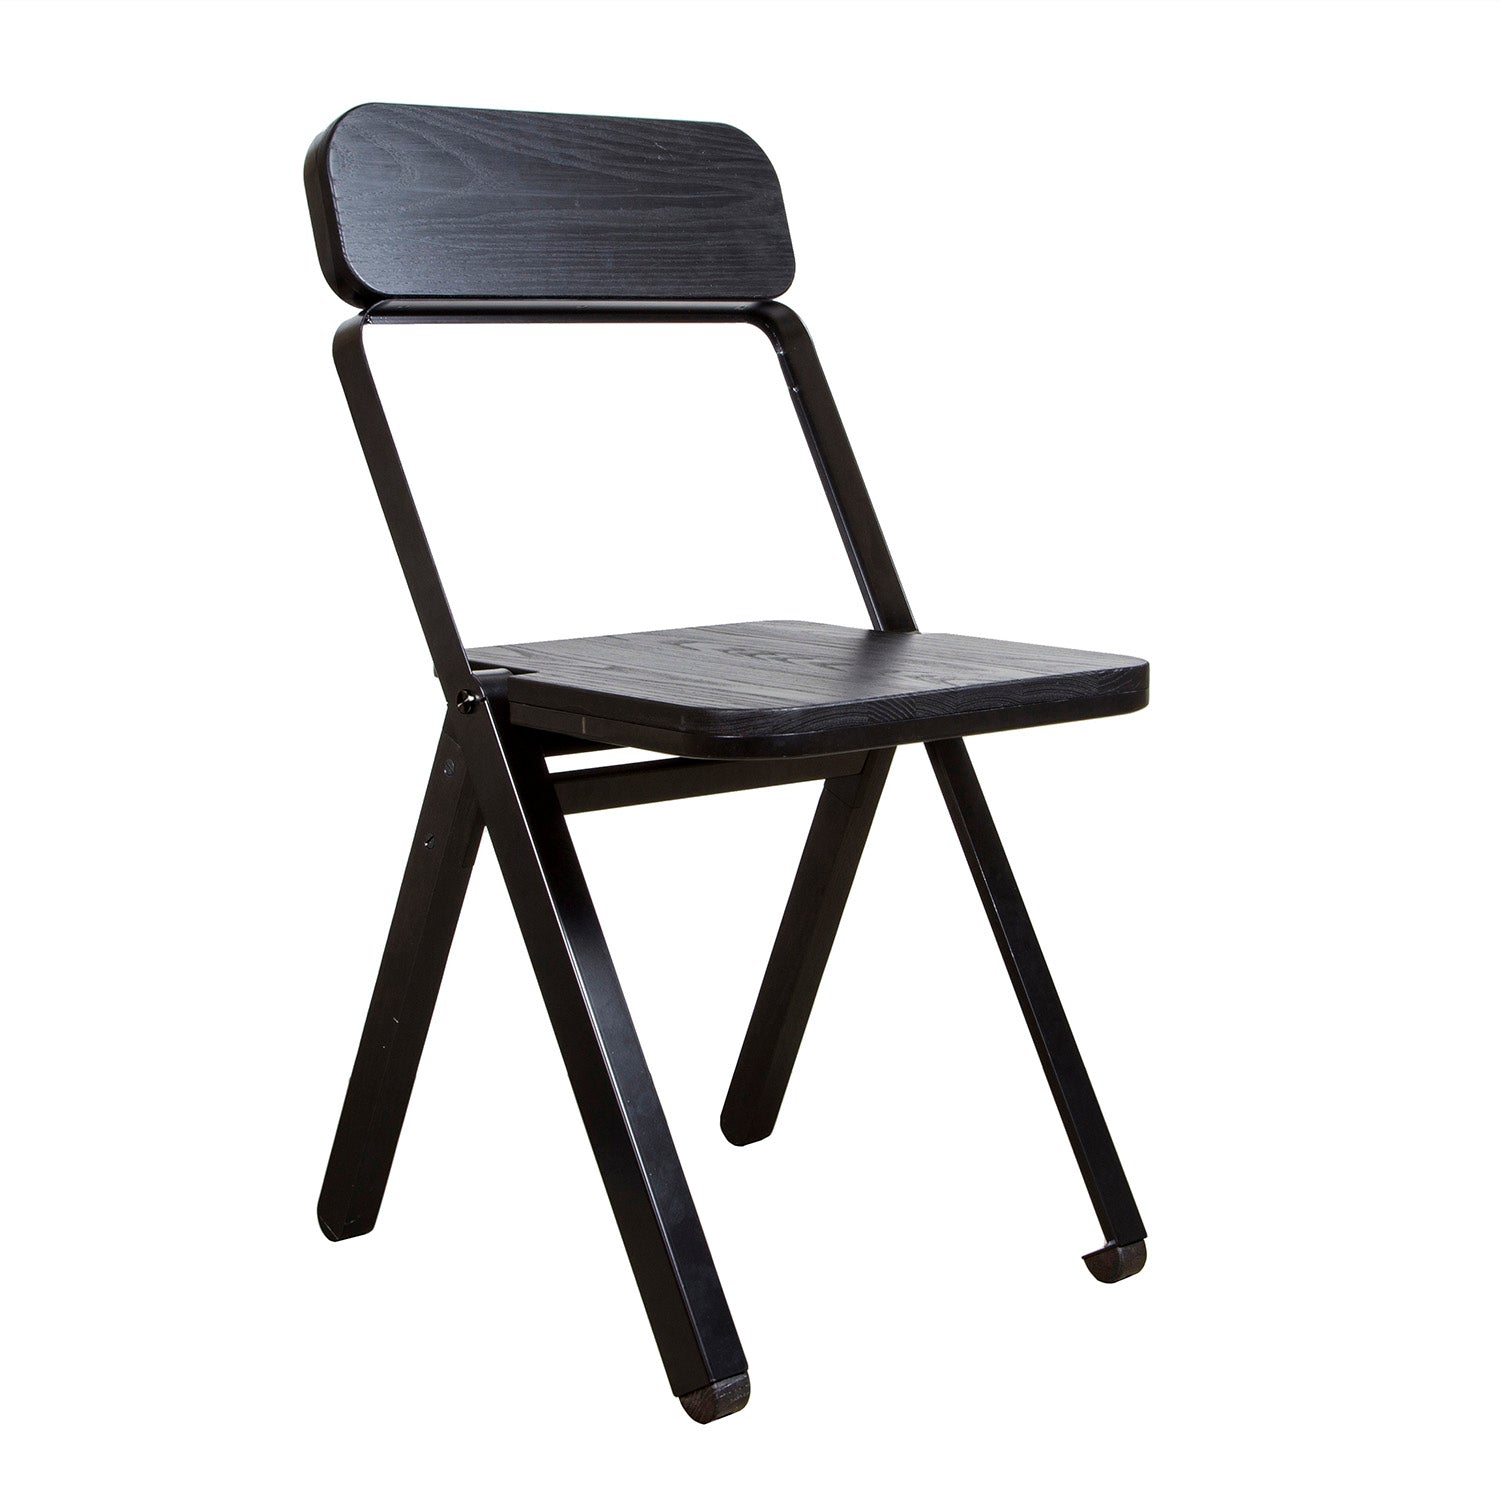 buy folding chairs online